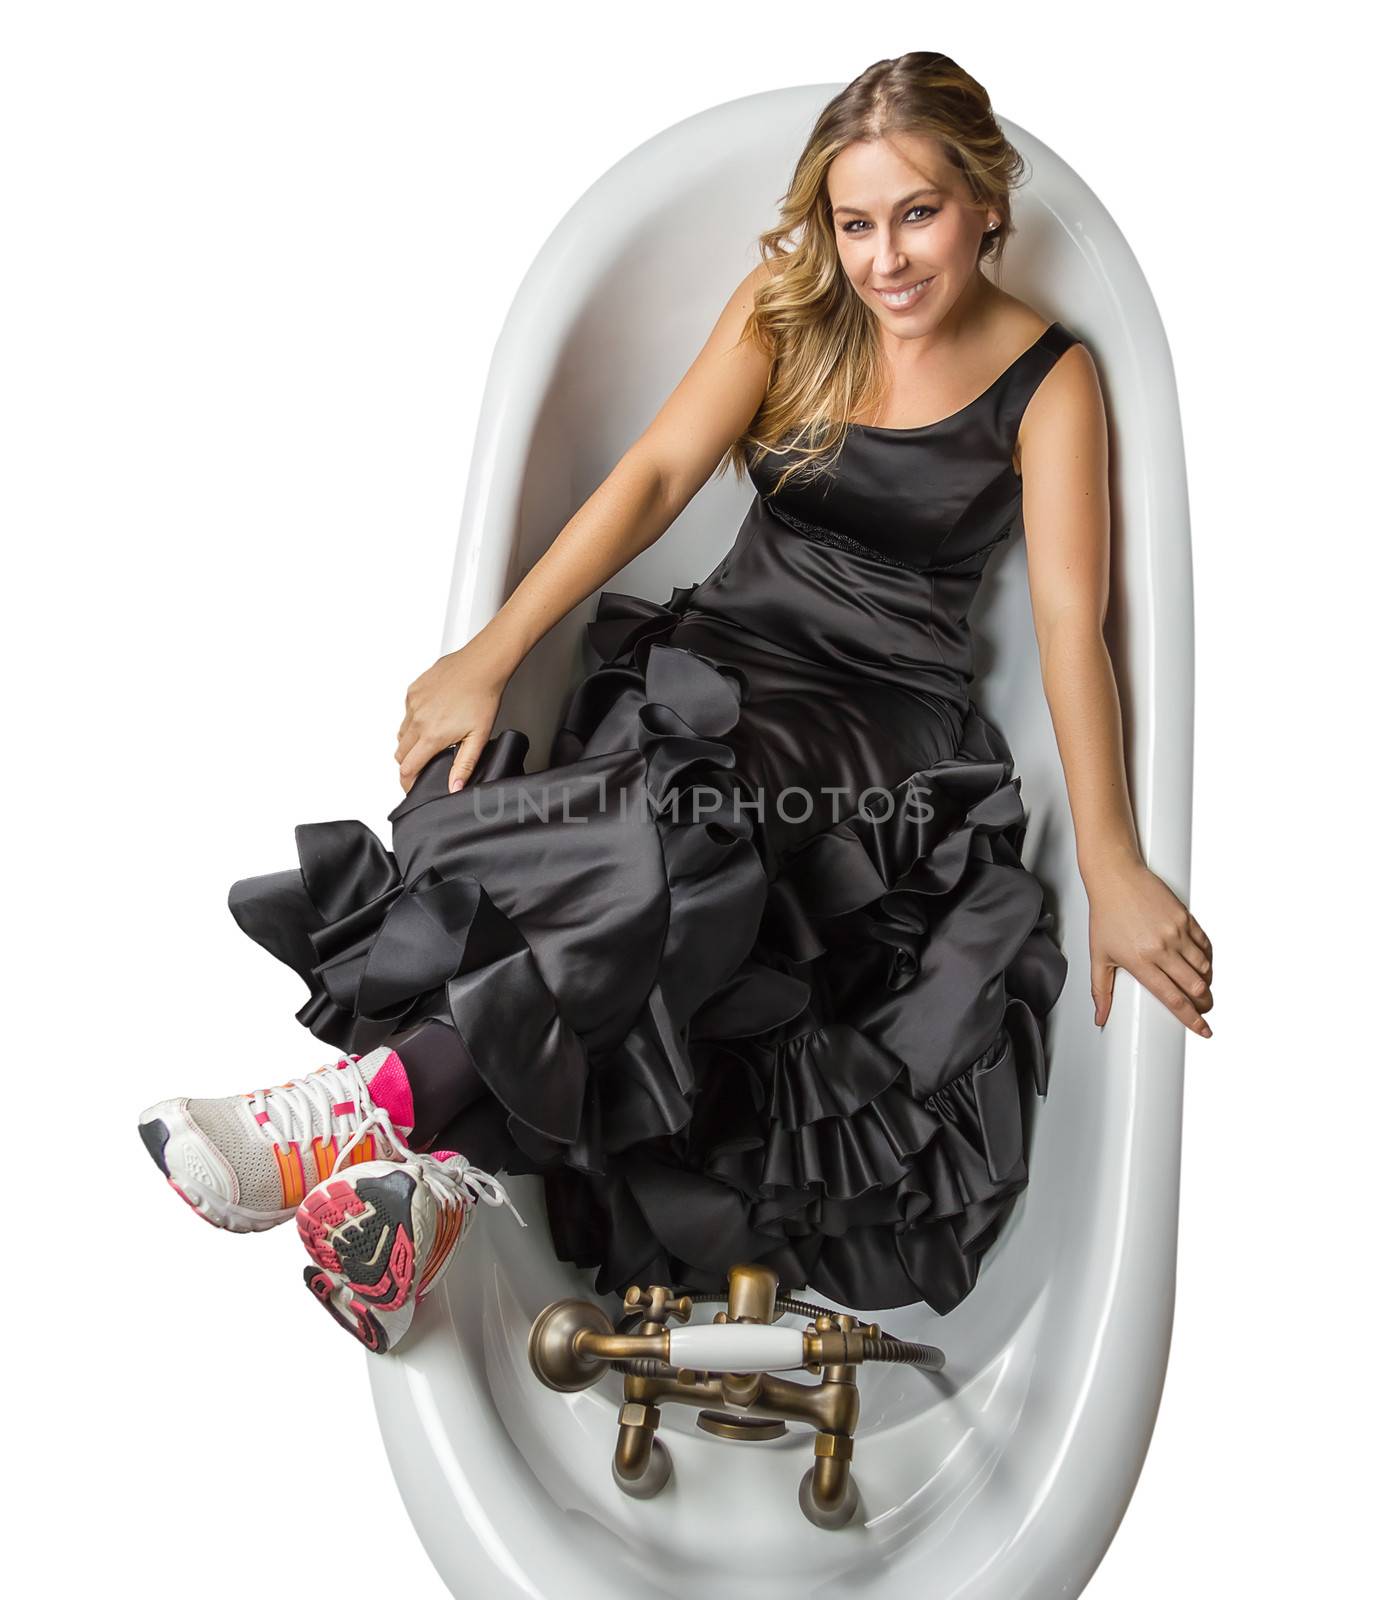 Portrait of beautiful fashion girl with black spanish flamenco dress and running shoes posing in a vintage bathtub on white background